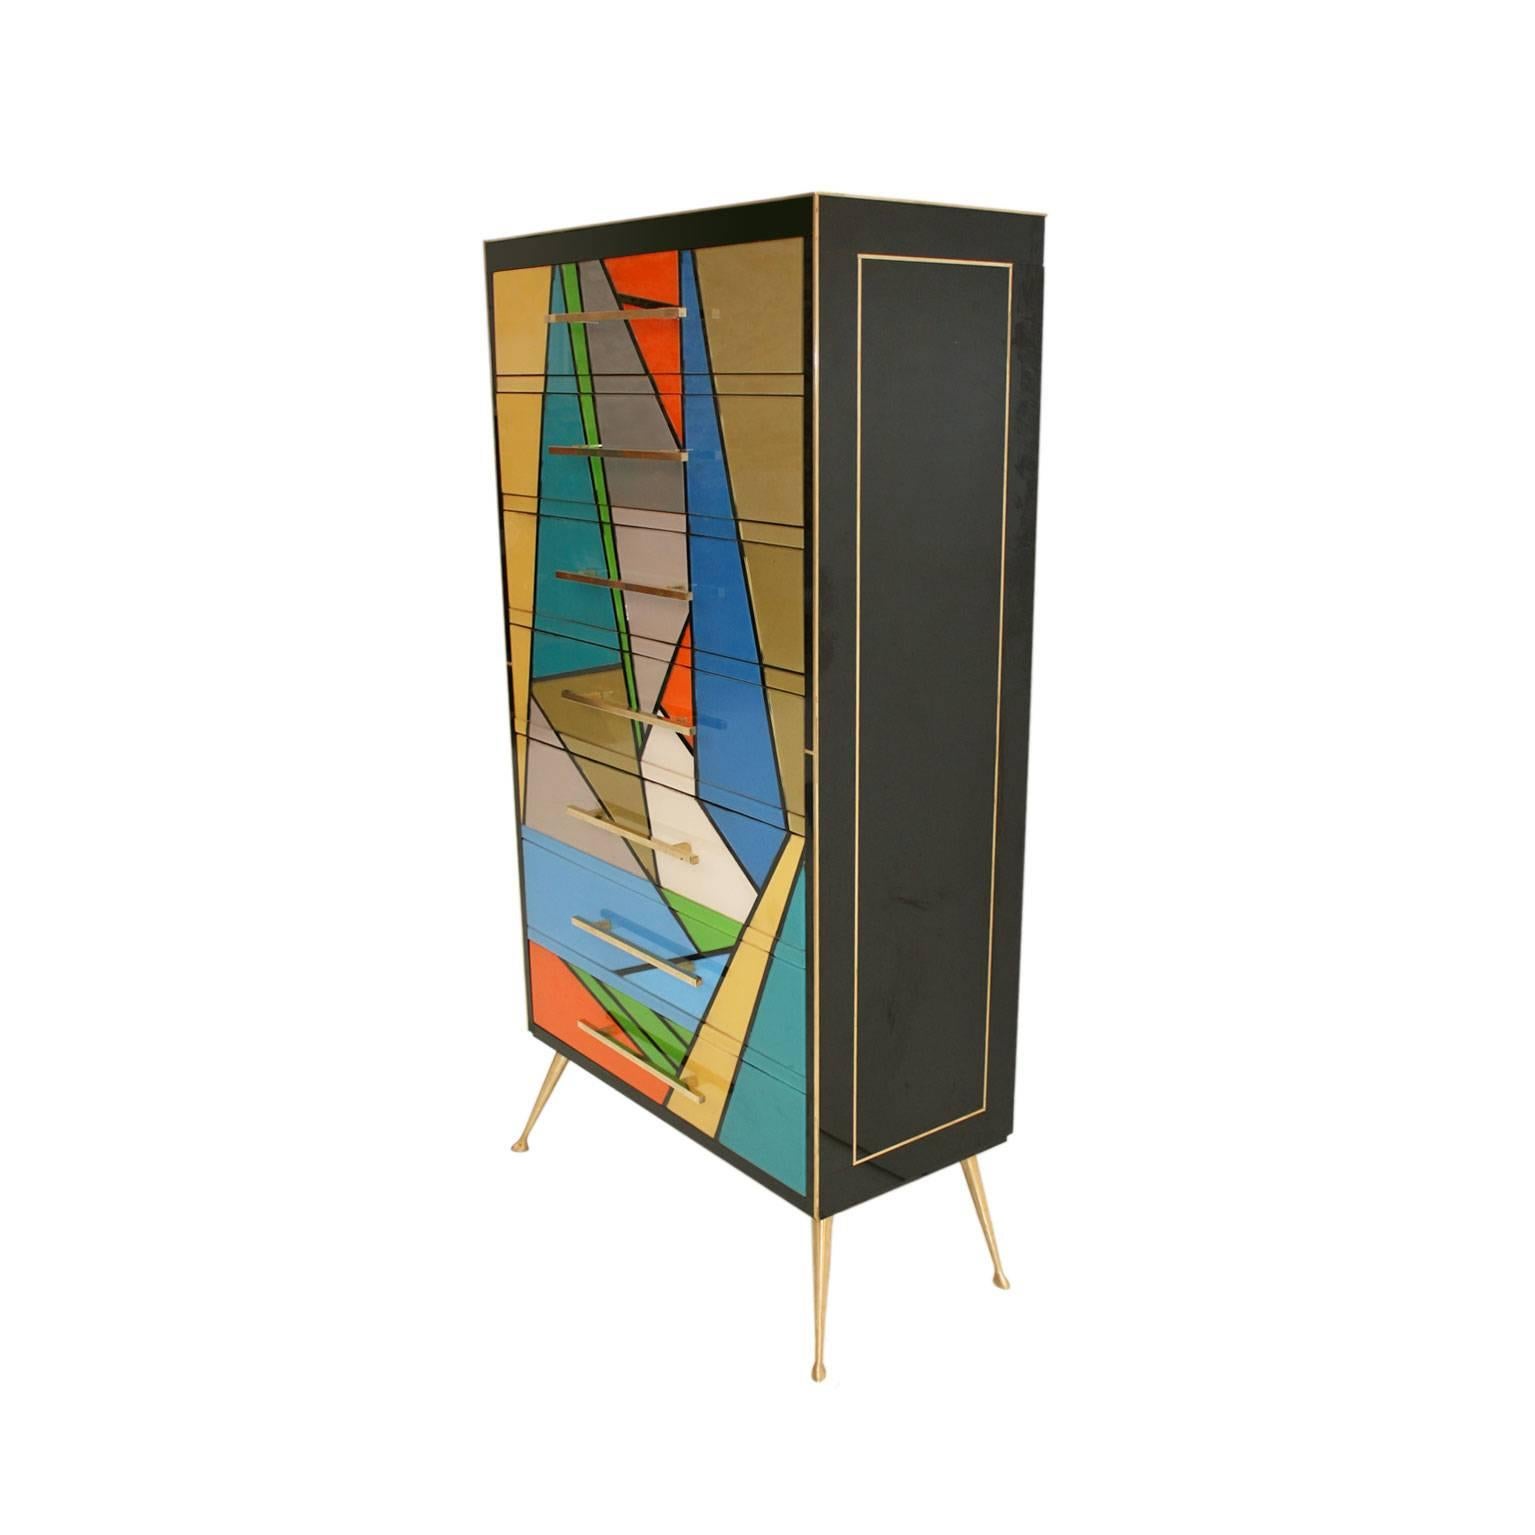 Italian commode with seven drawers, made of solid wood structure from the sixties. Currently reinterpreted and covered by hand in Murano glass in different colors with handles and details in brass. Legs made in bronze.